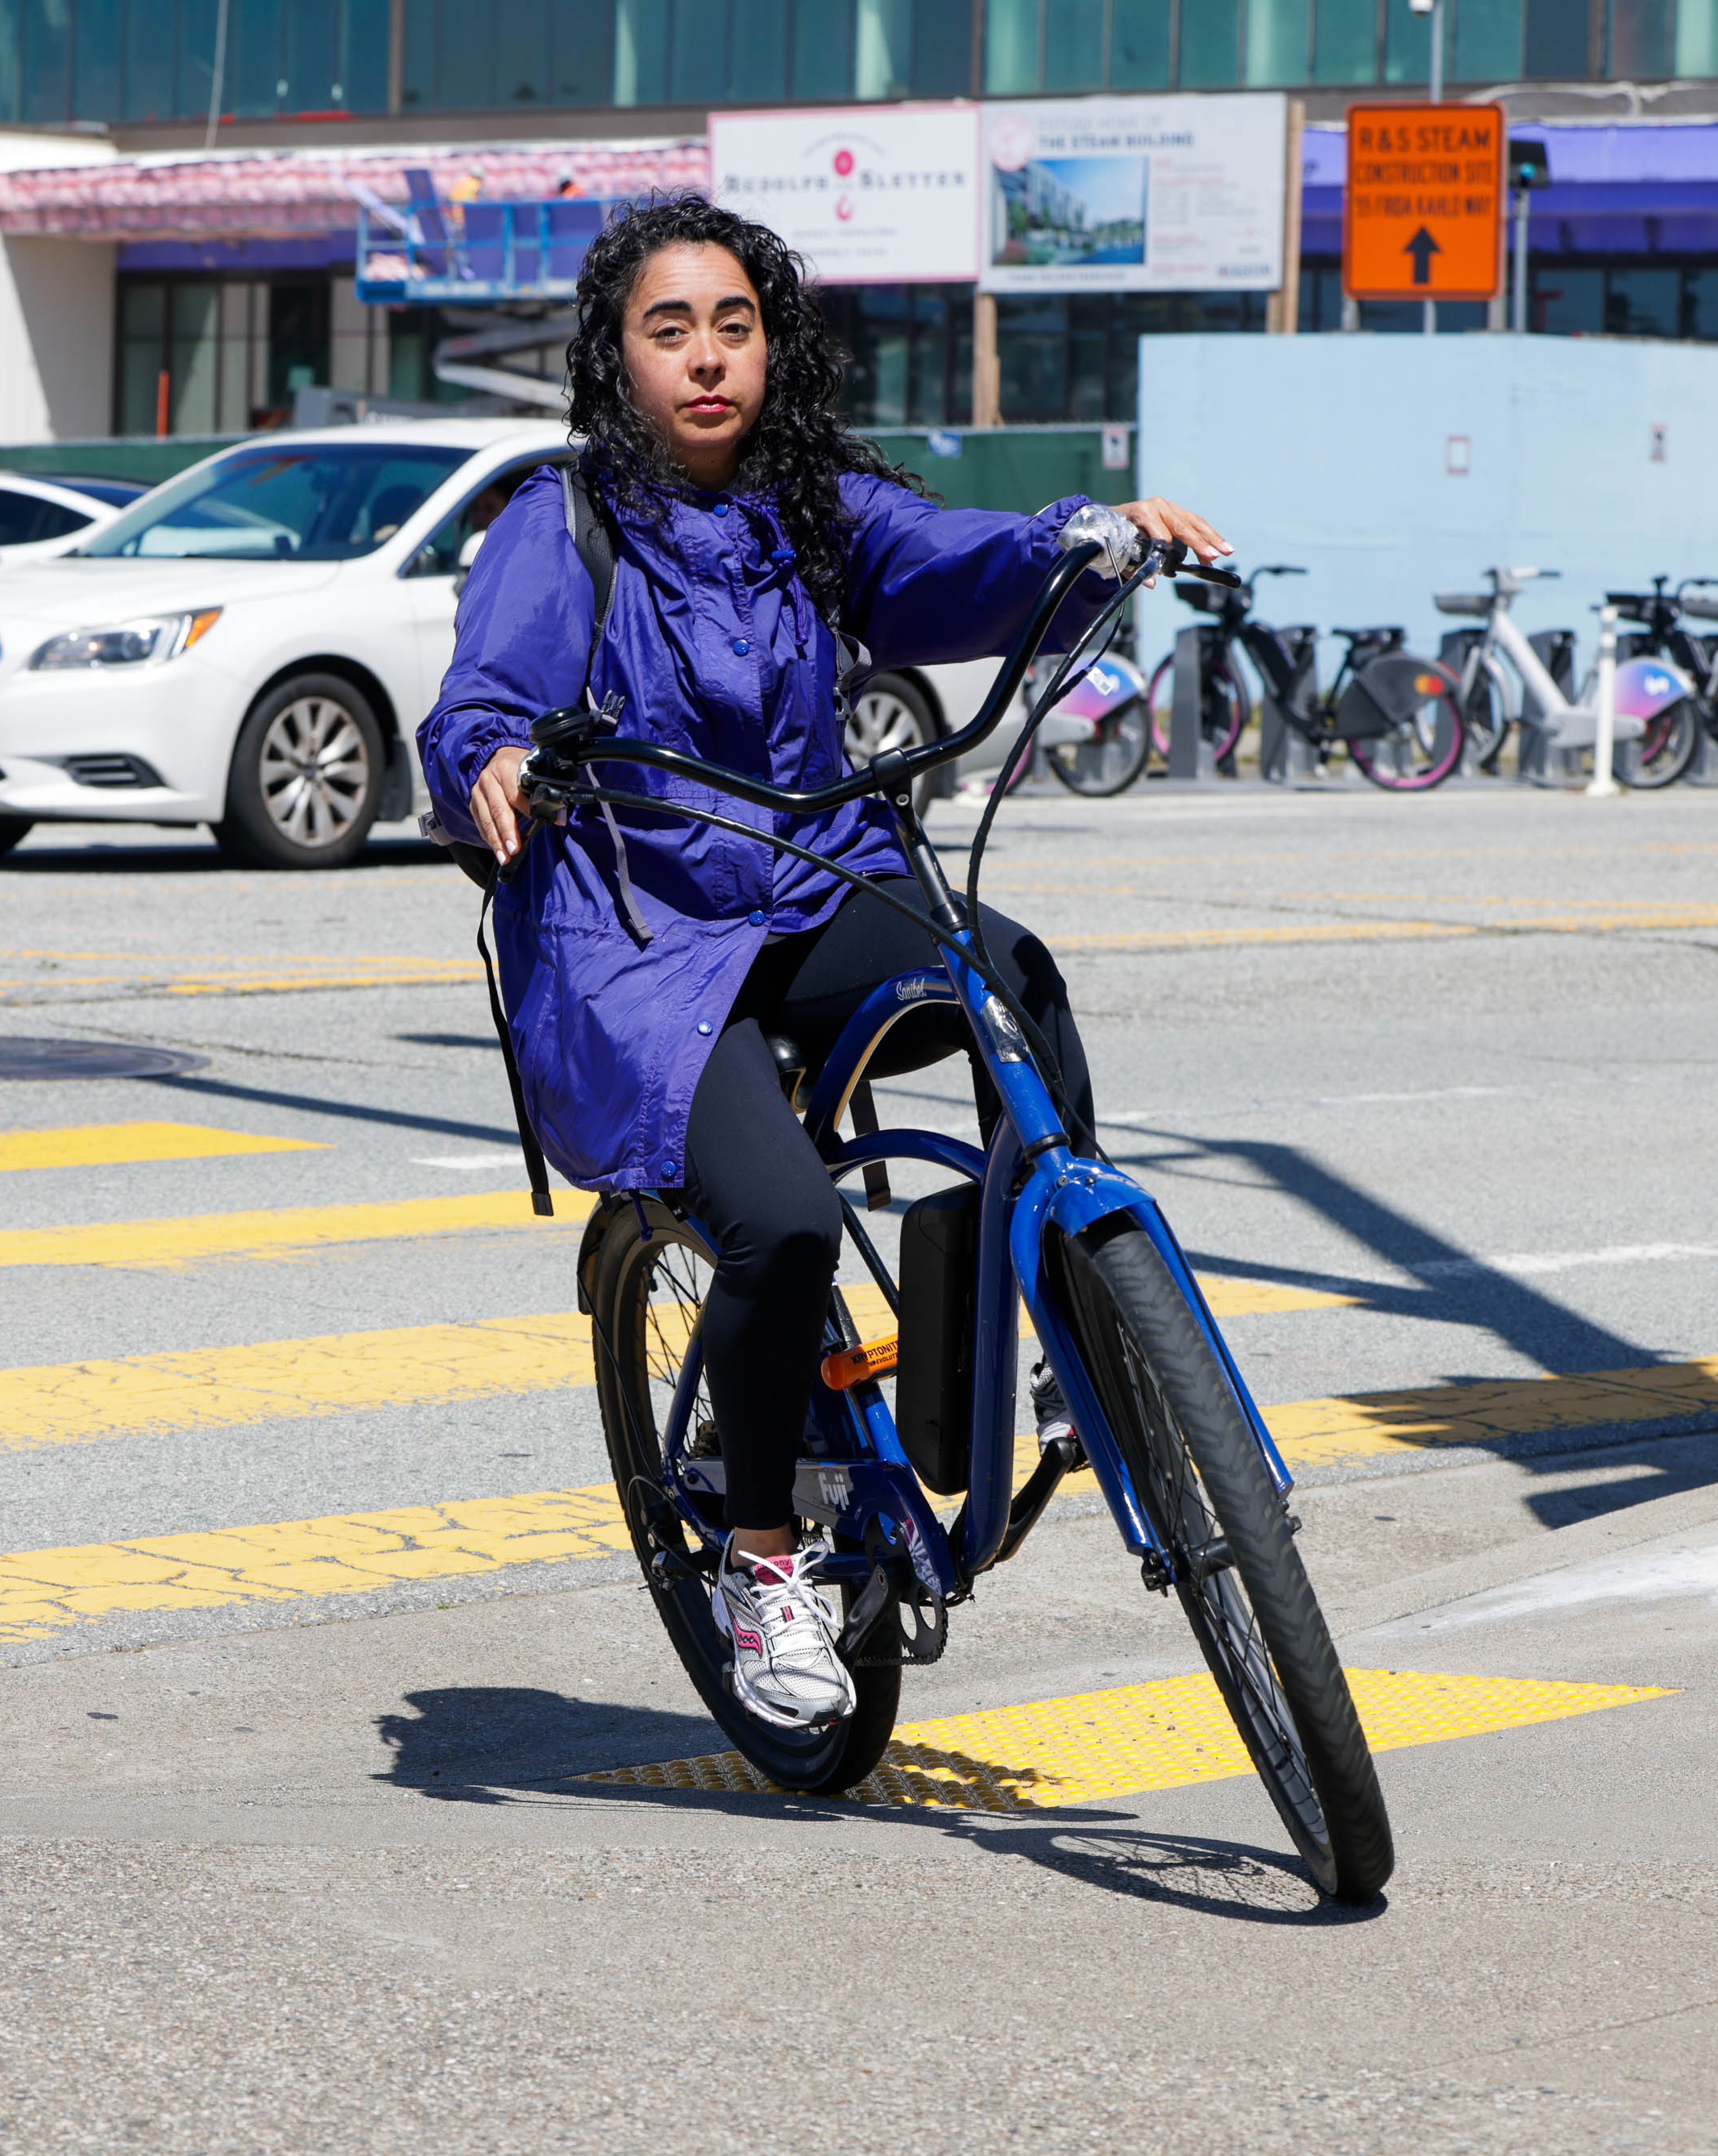 A person in a blue coat rides a blue bike across a crosswalk, with parked cars and buildings behind.